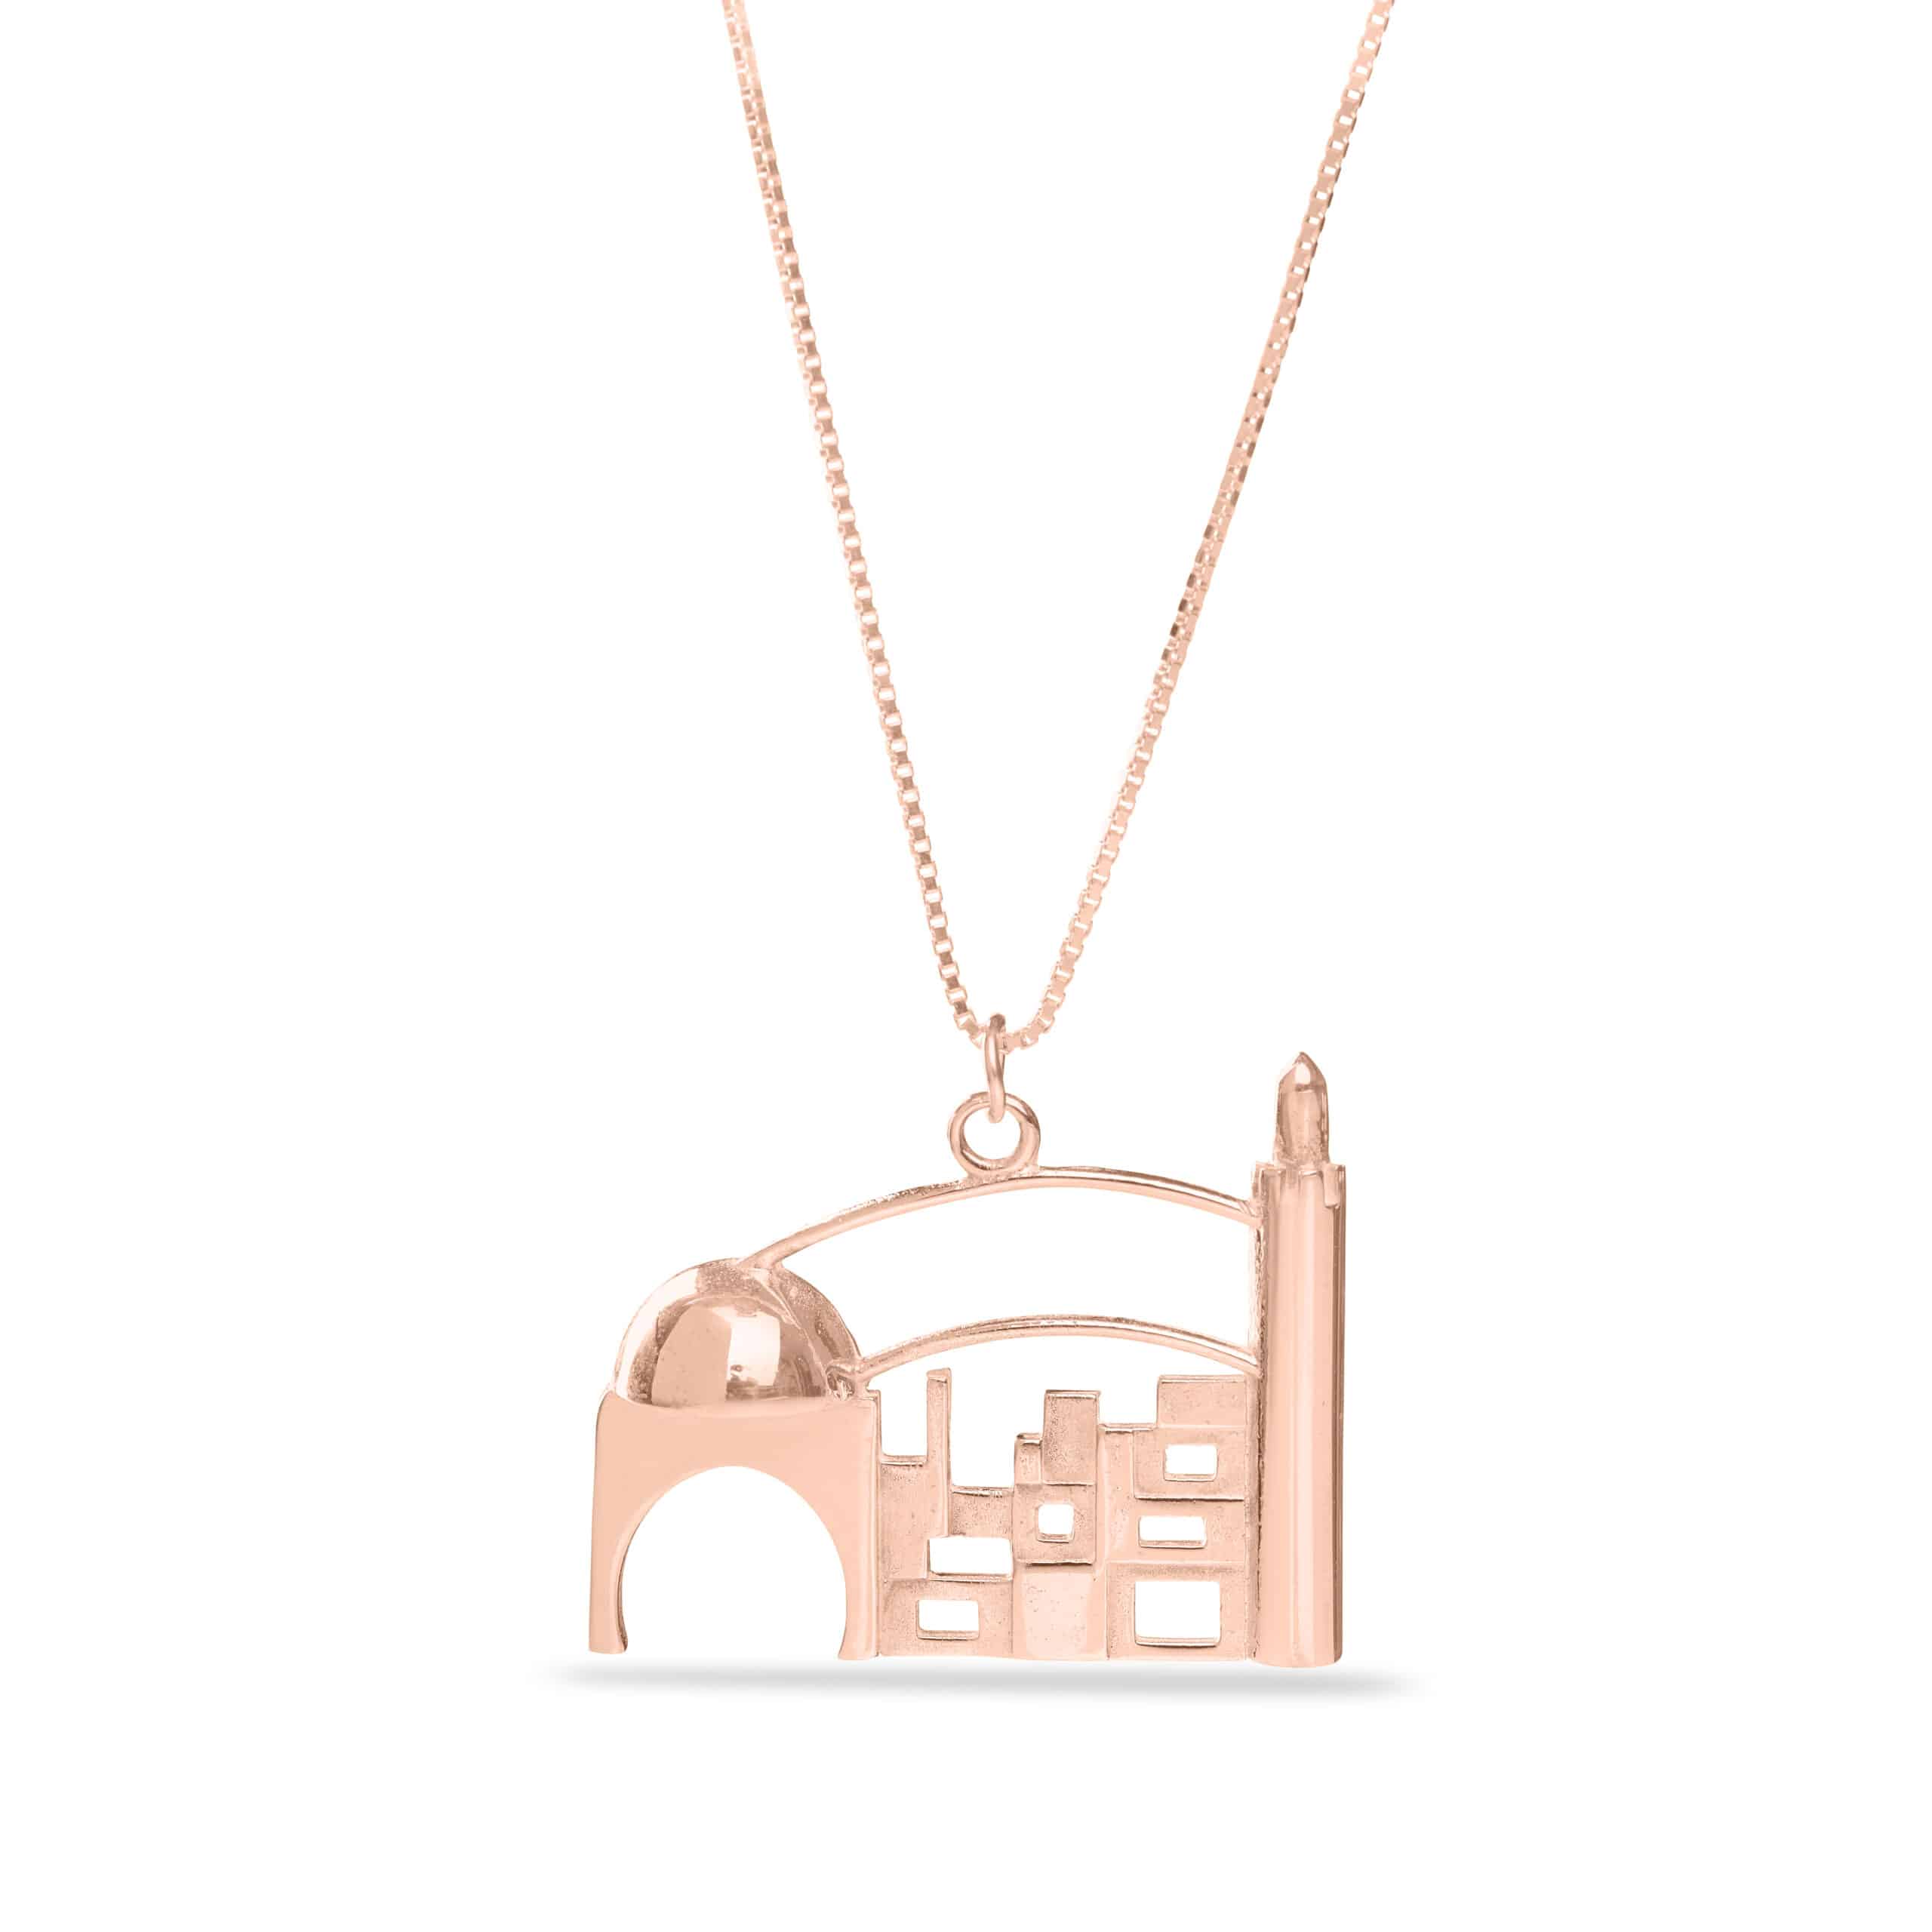 Personalized Jerusalem Necklace made of 14K Yelllow Gold